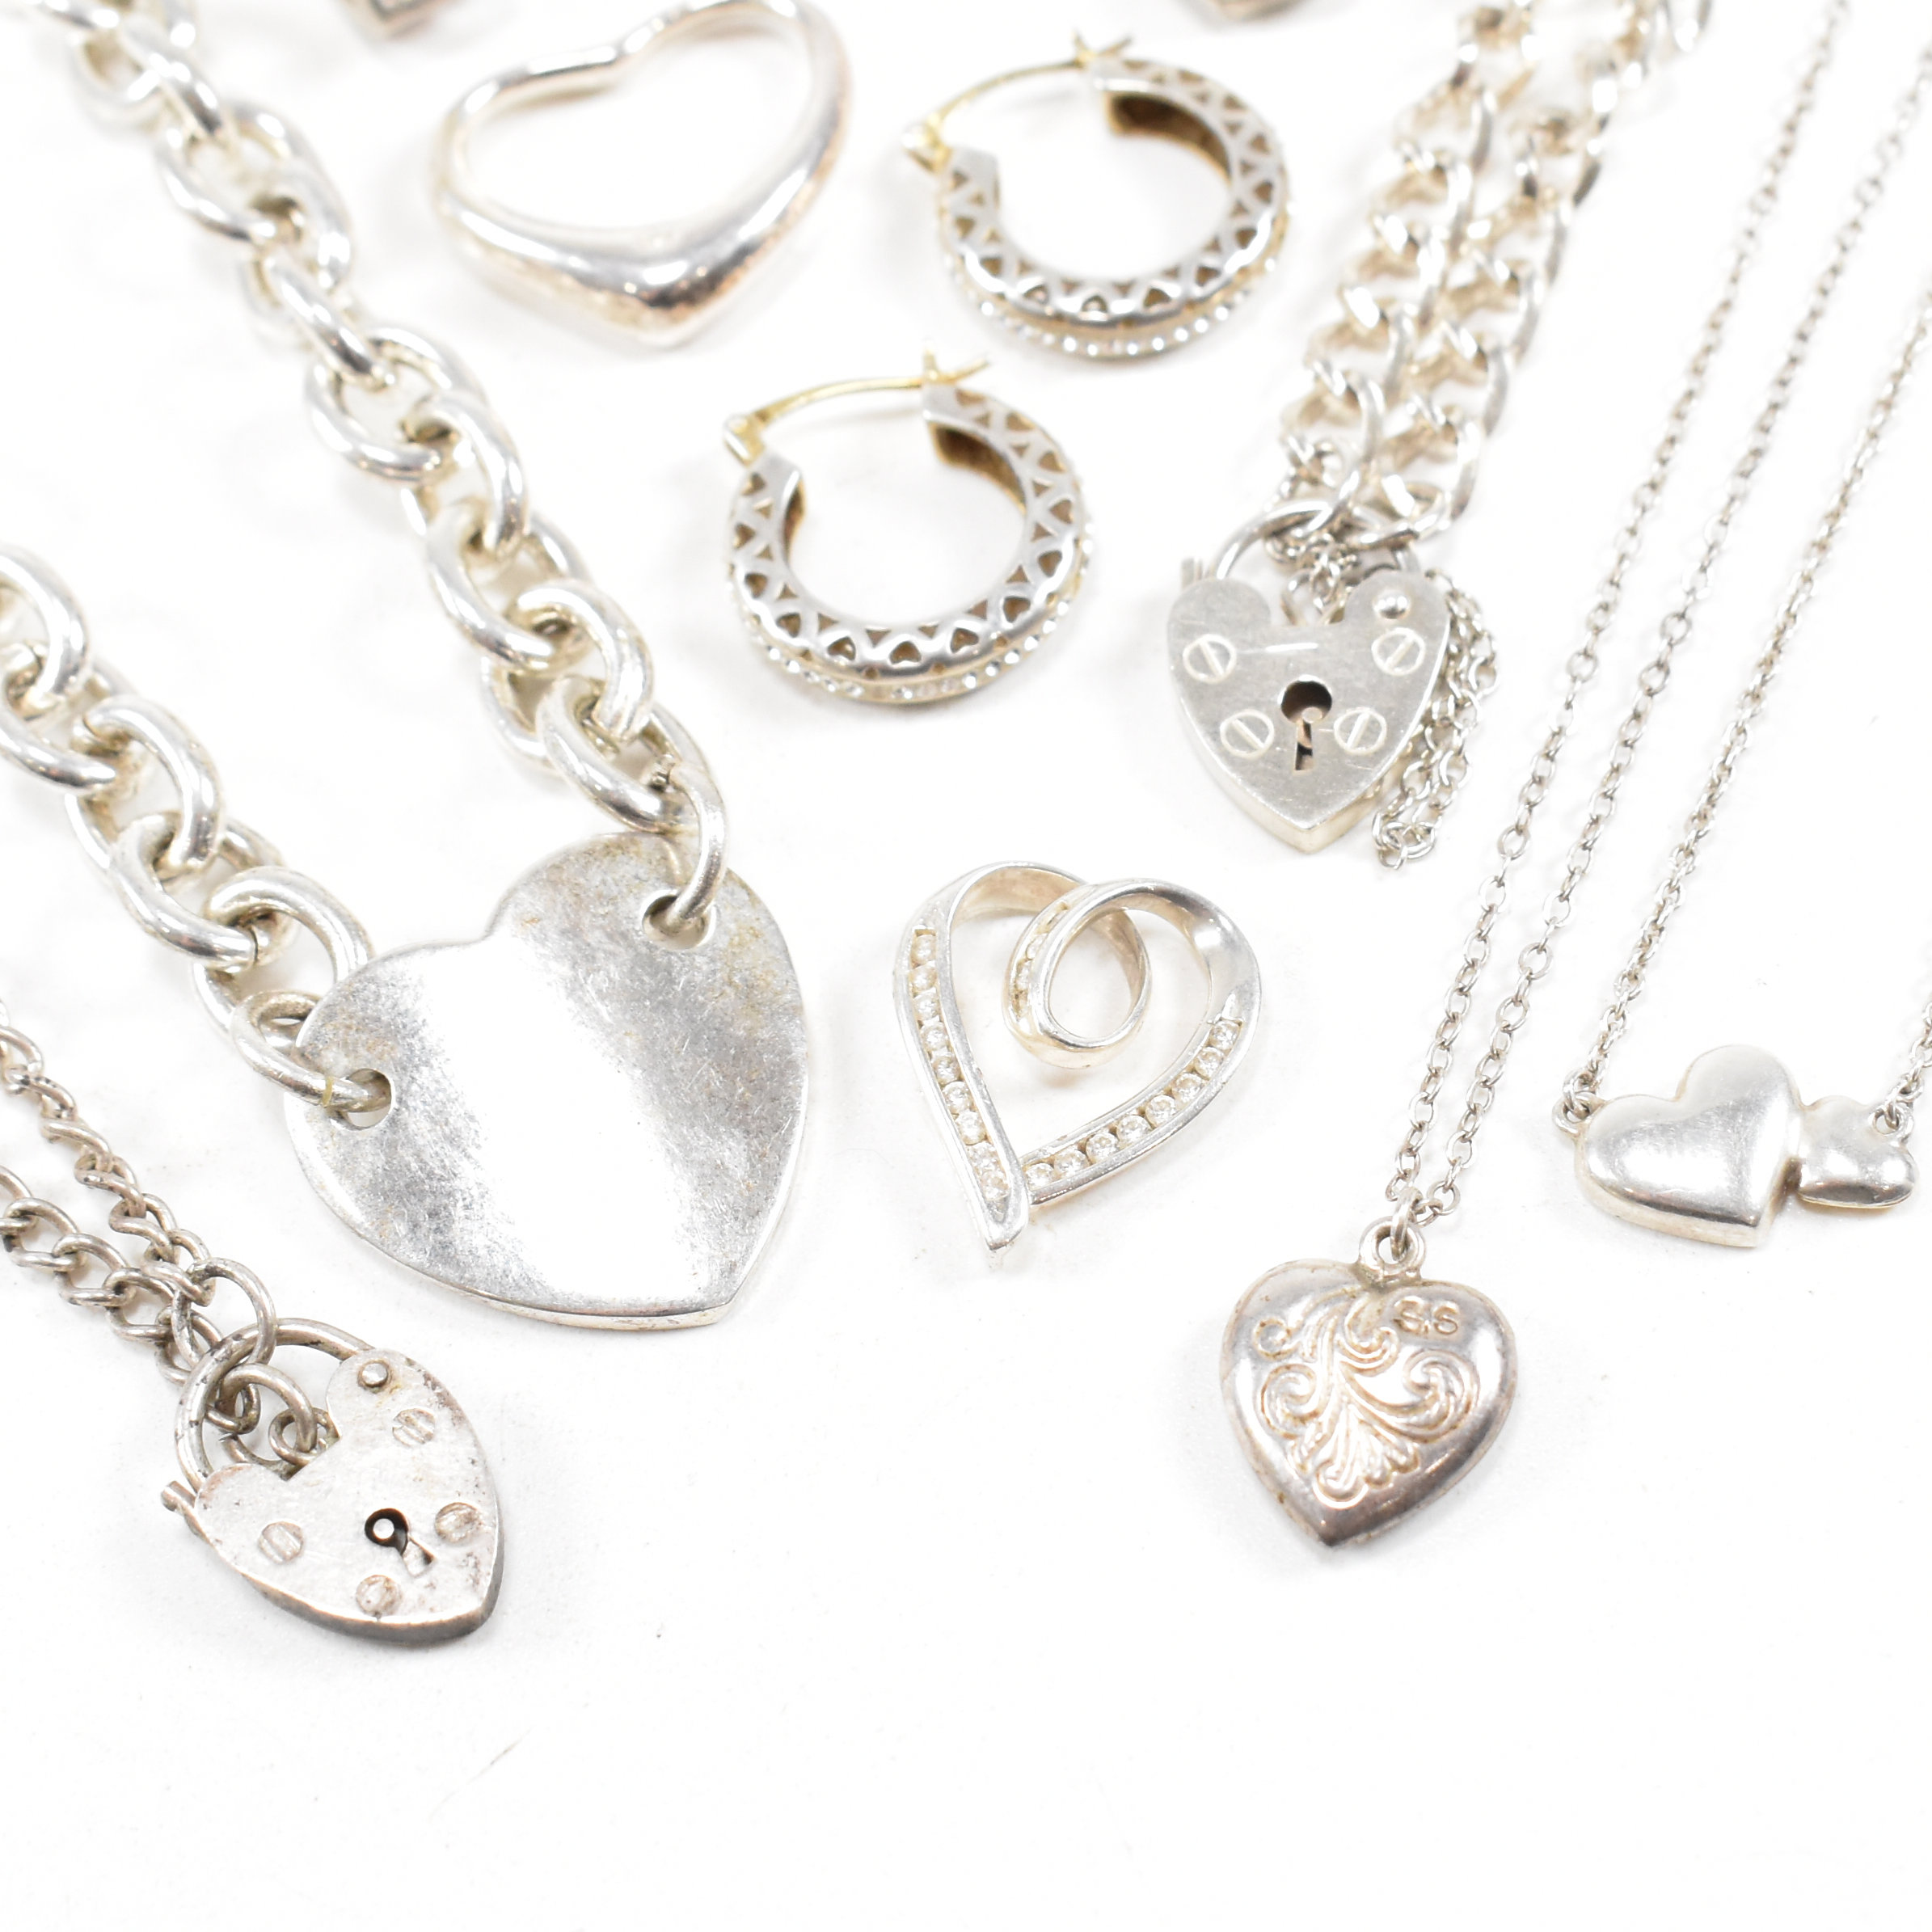 COLLECTION OF 925 SILVER & WHITE METAL HEART JEWELLERY - Image 3 of 12